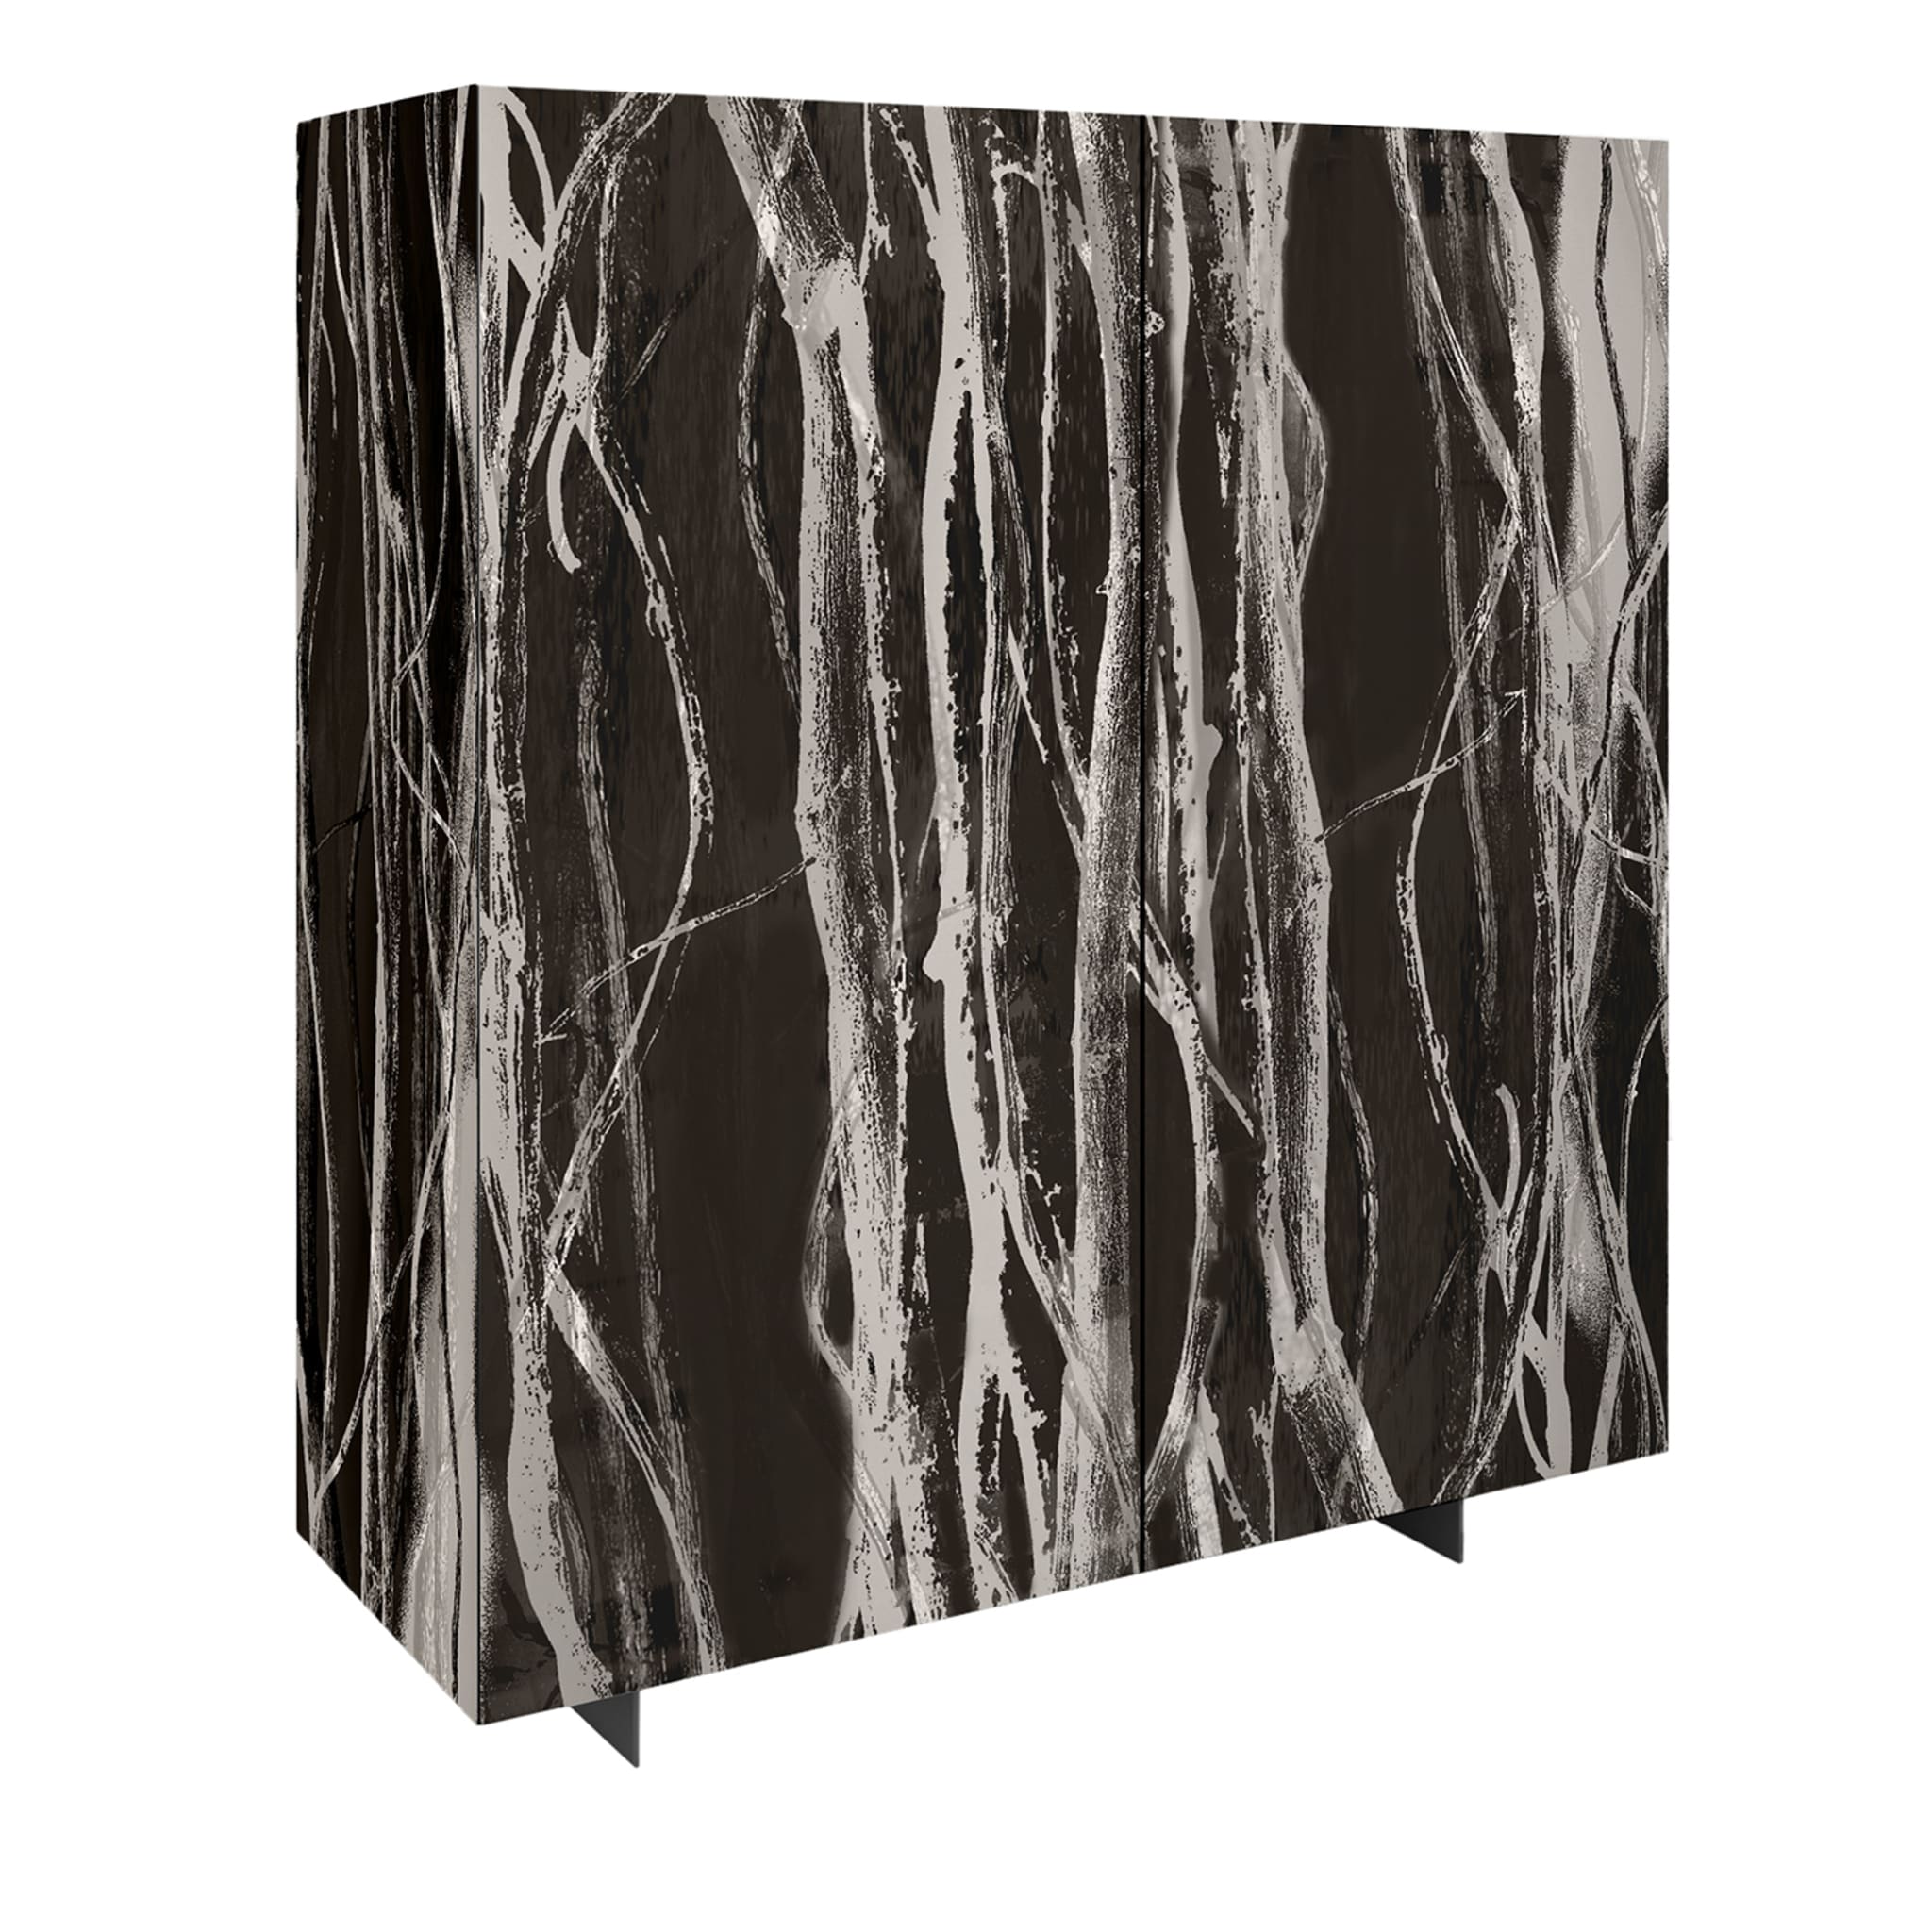 Wall Dress Forest 2-Door Black Cabinet - Main view